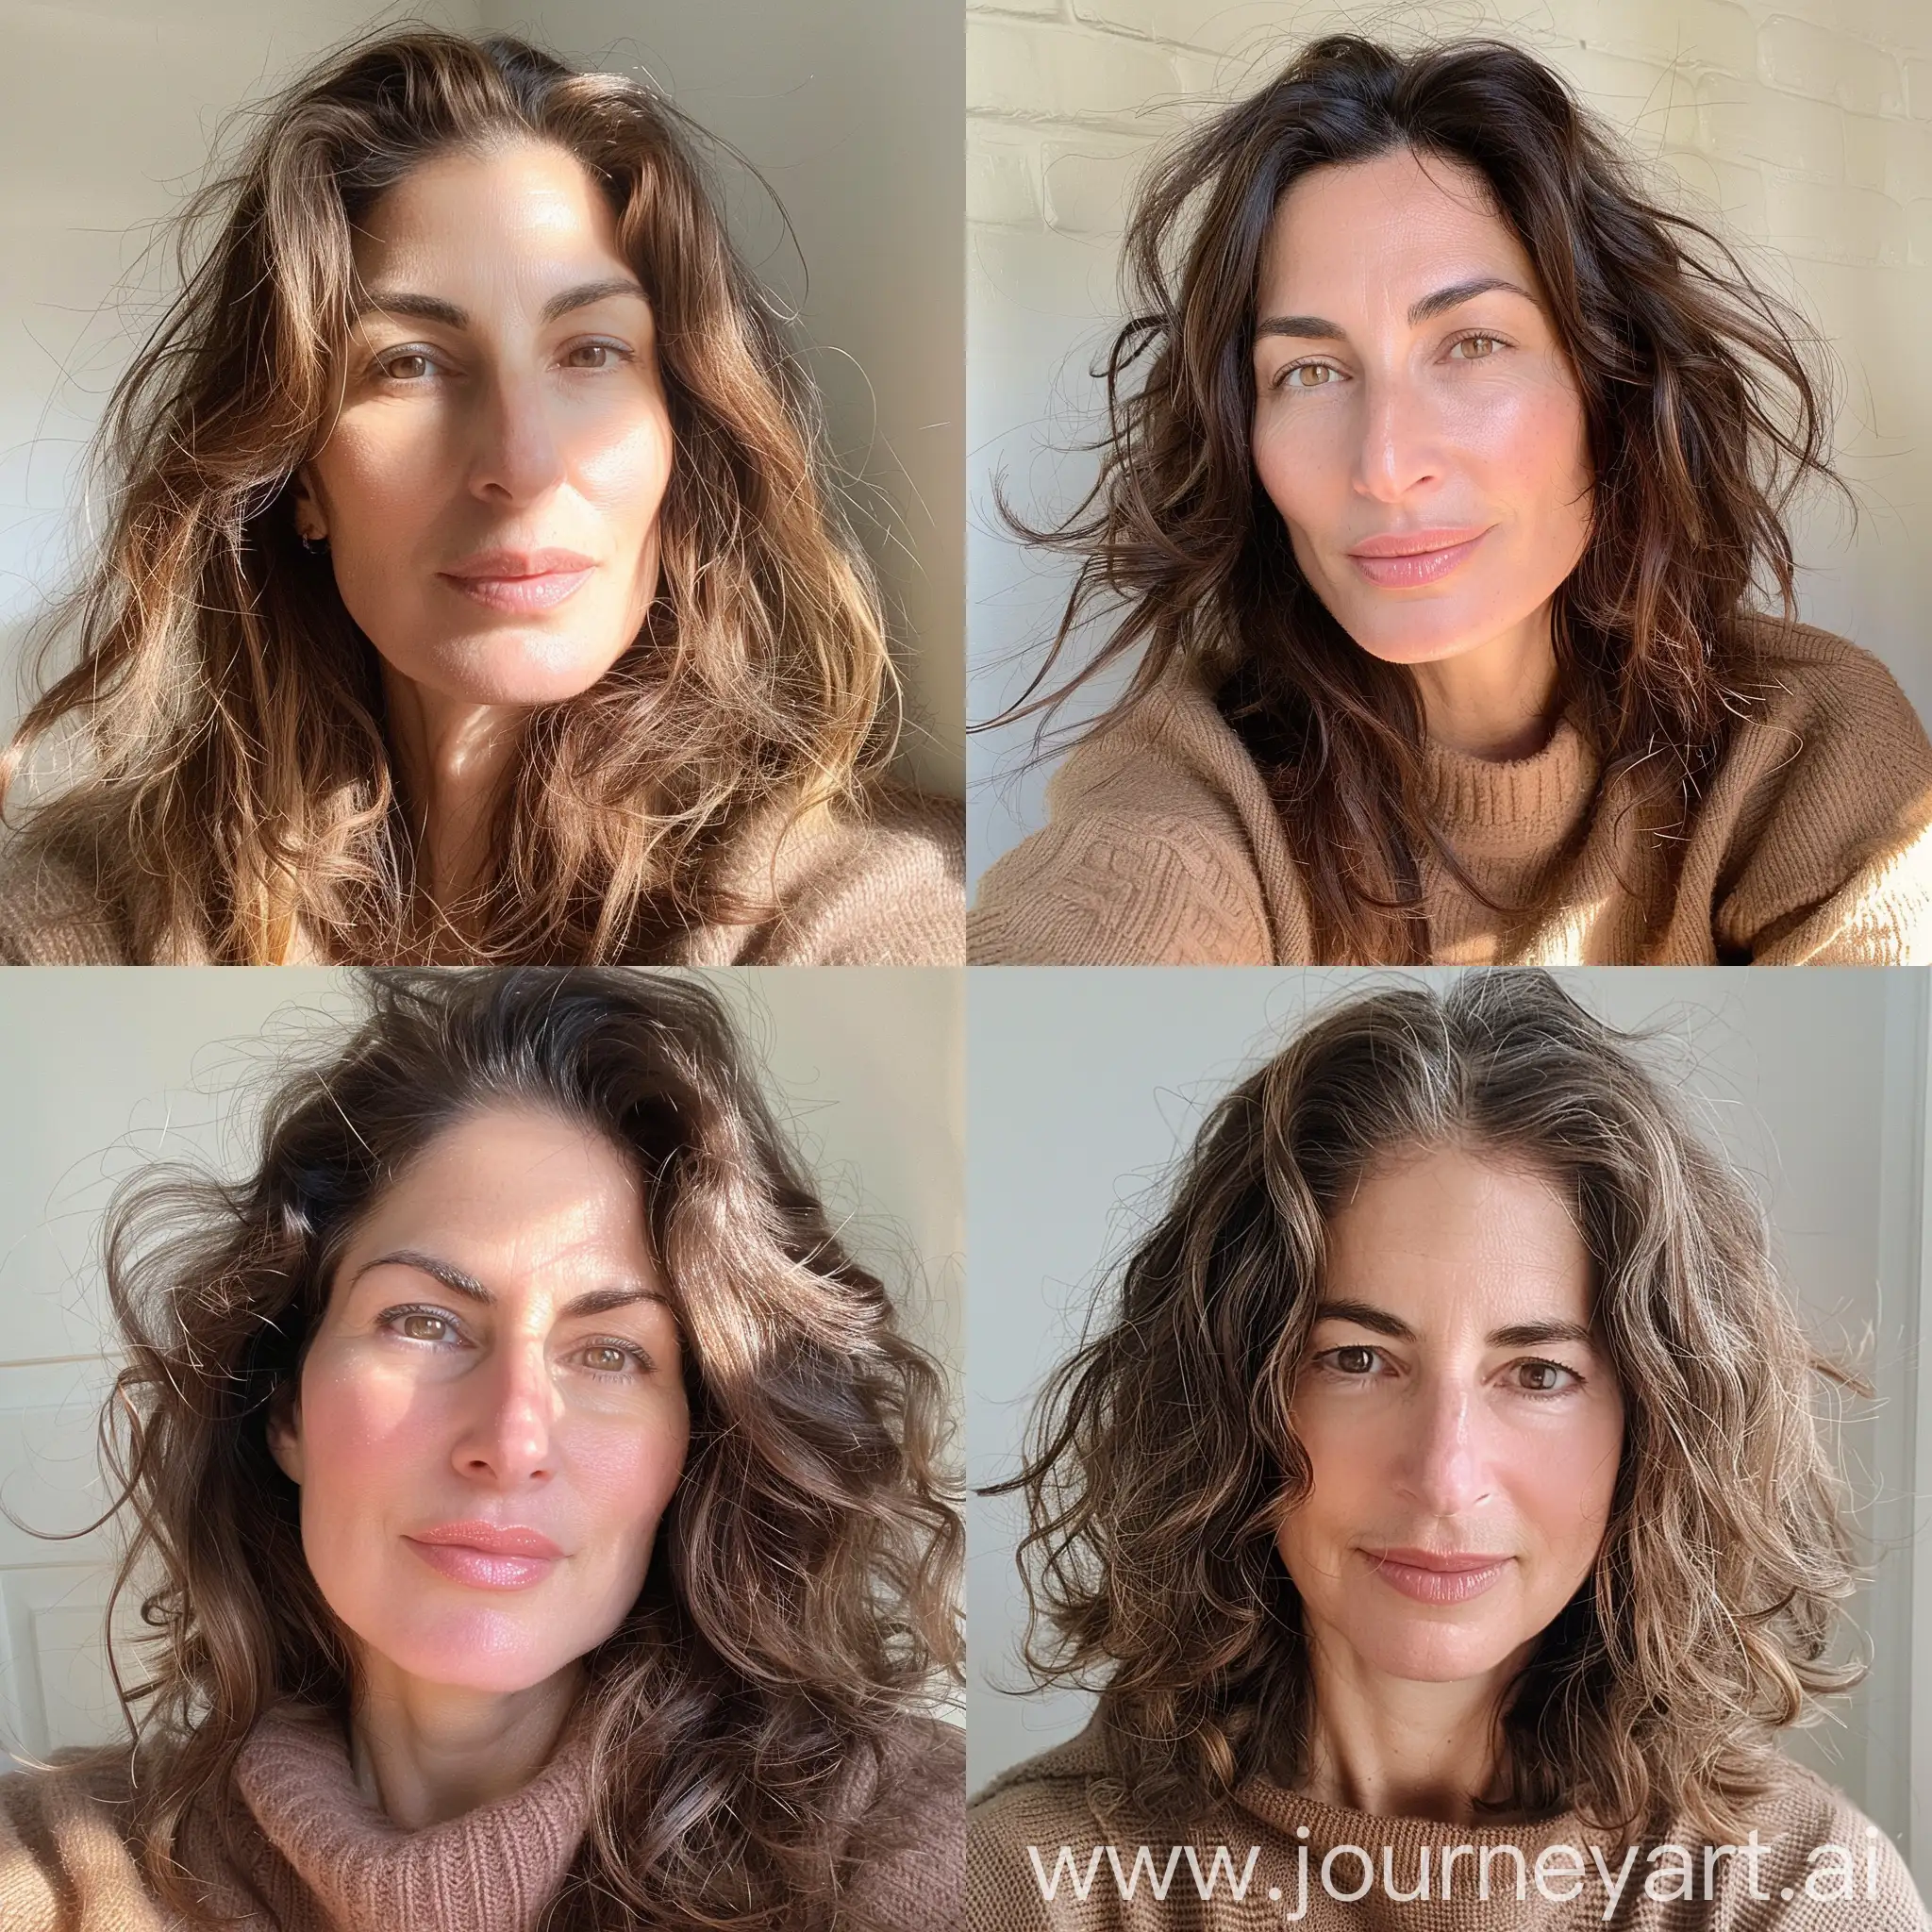 Aesthetic instagram selfie of a Jewish mother with full wavy brown hair, broad nose, big bridge nose, crooked nose, woman, mid 40's, soft brown clothing color tones--ar 9:16